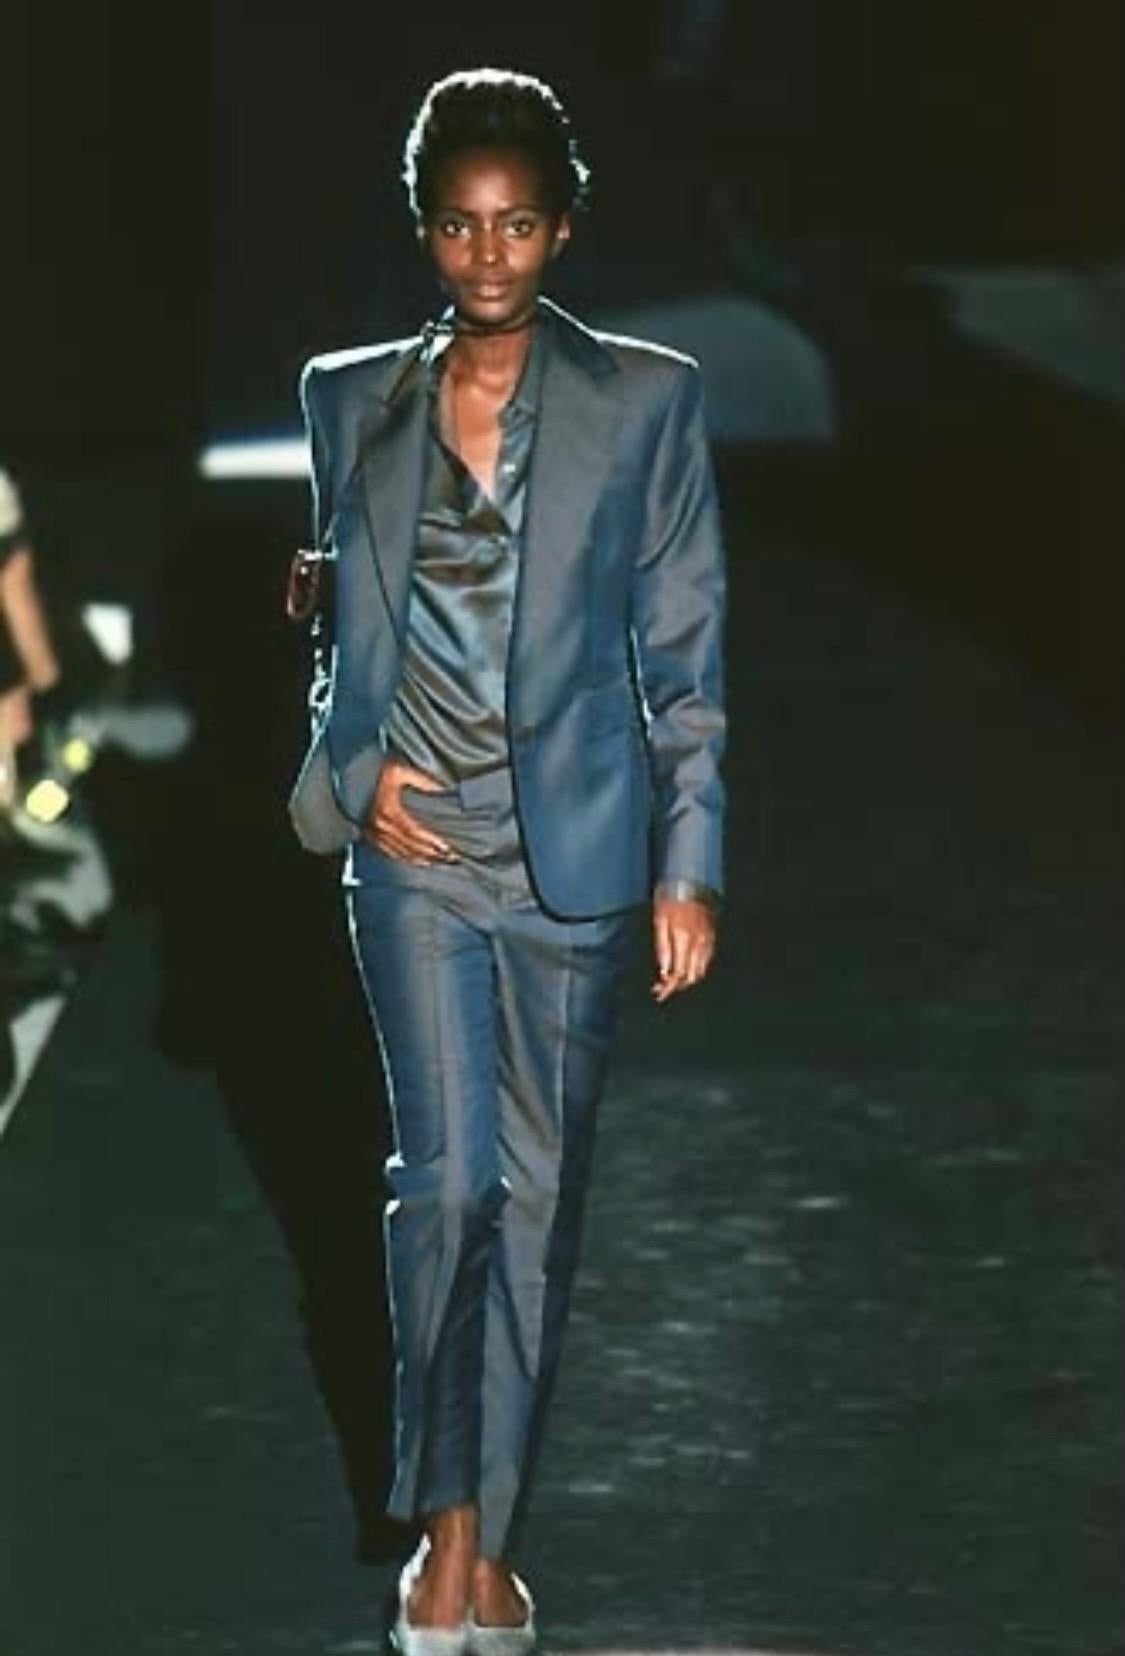 Black S/S 1998 Gucci by Tom Ford Runway Iridescent Satin Grey Rust Button Up Pant Set For Sale